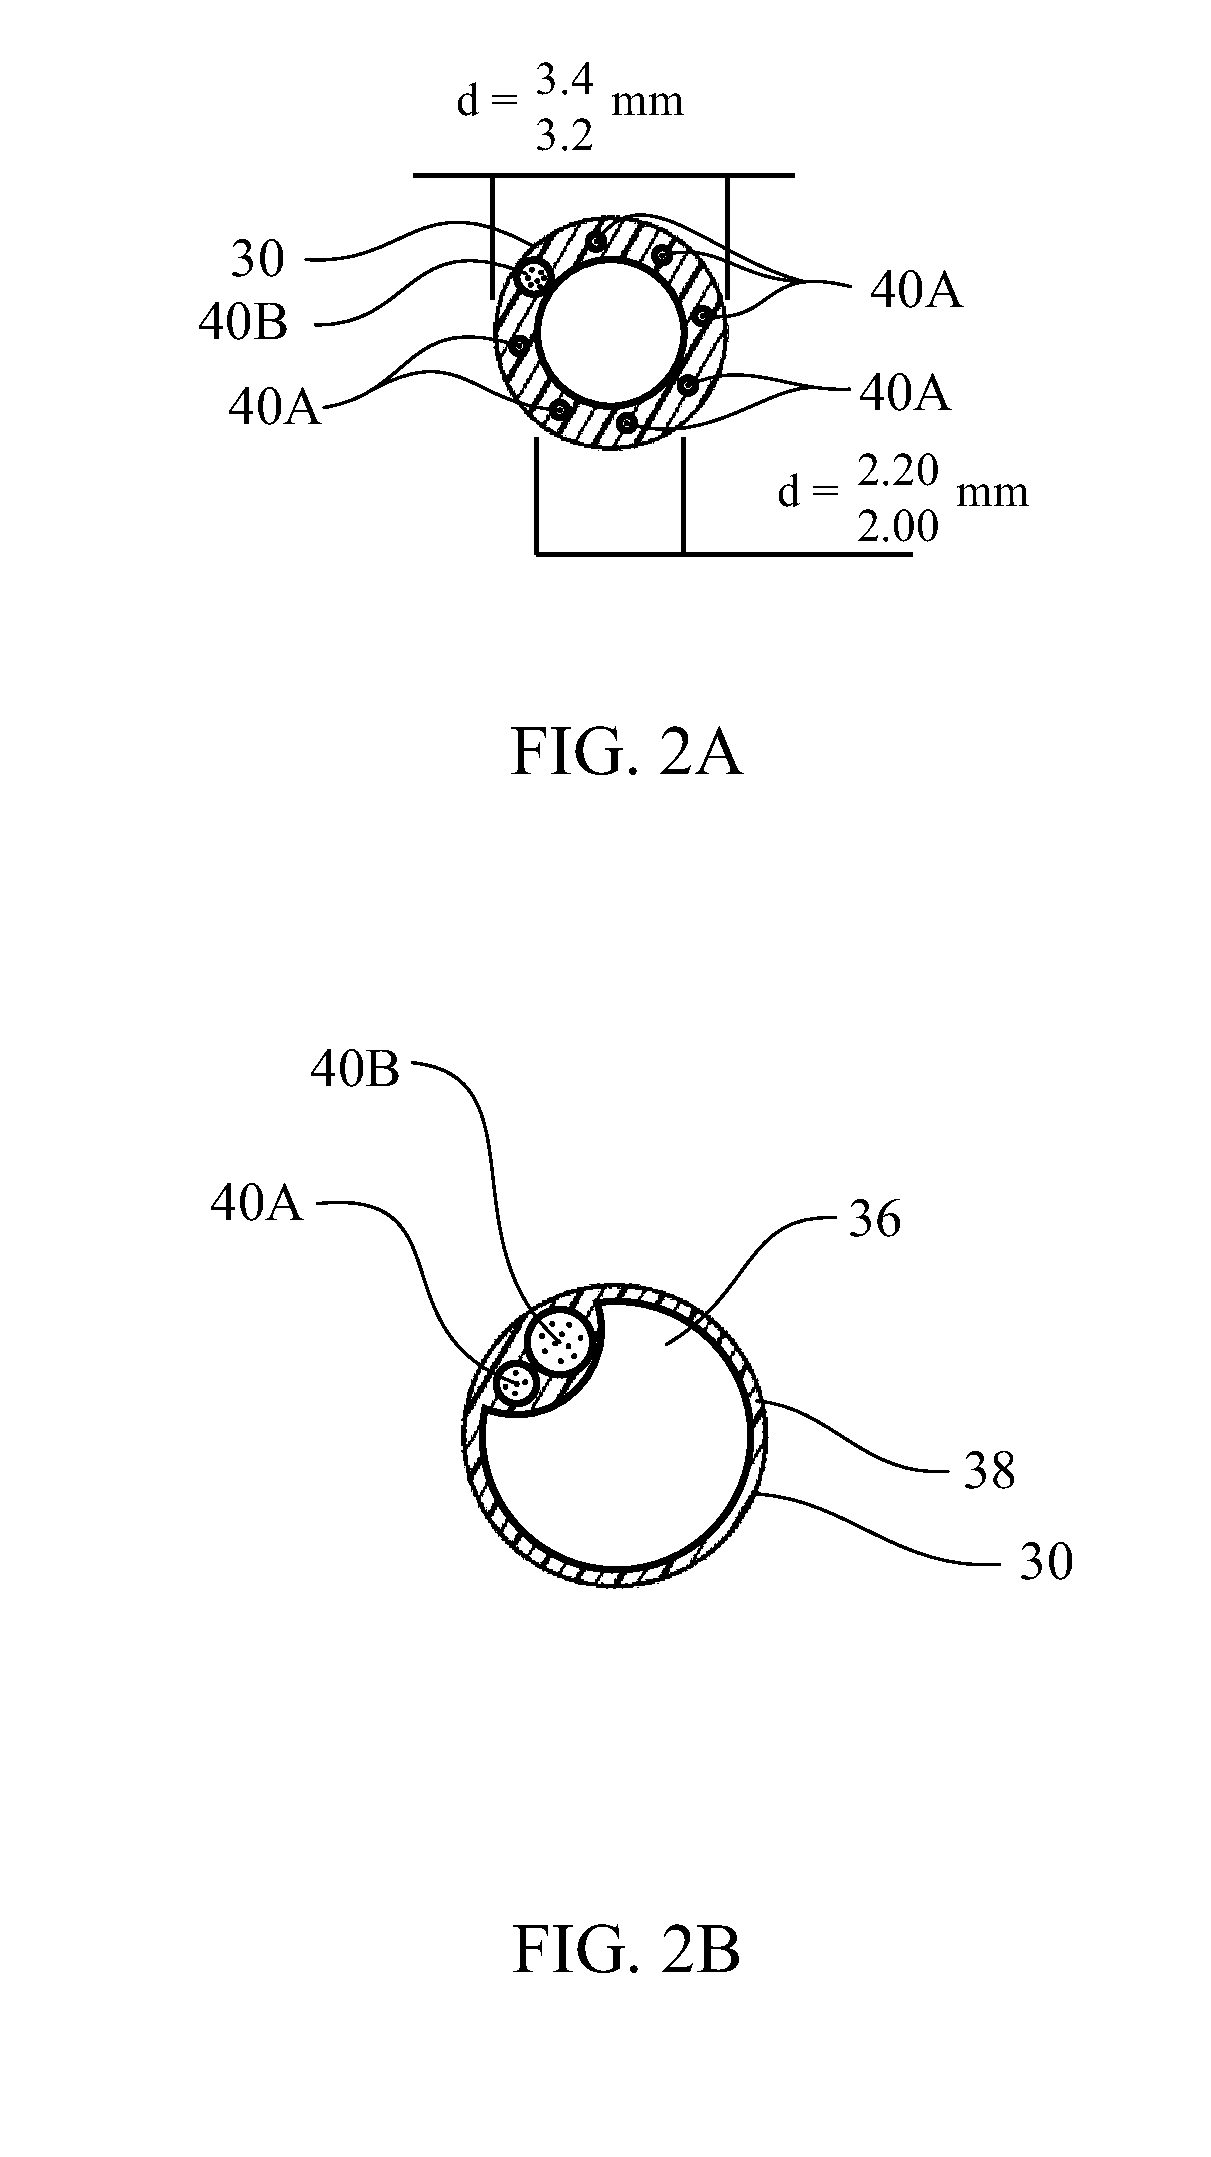 Optically guided medical tube and control unit assembly and methods of use